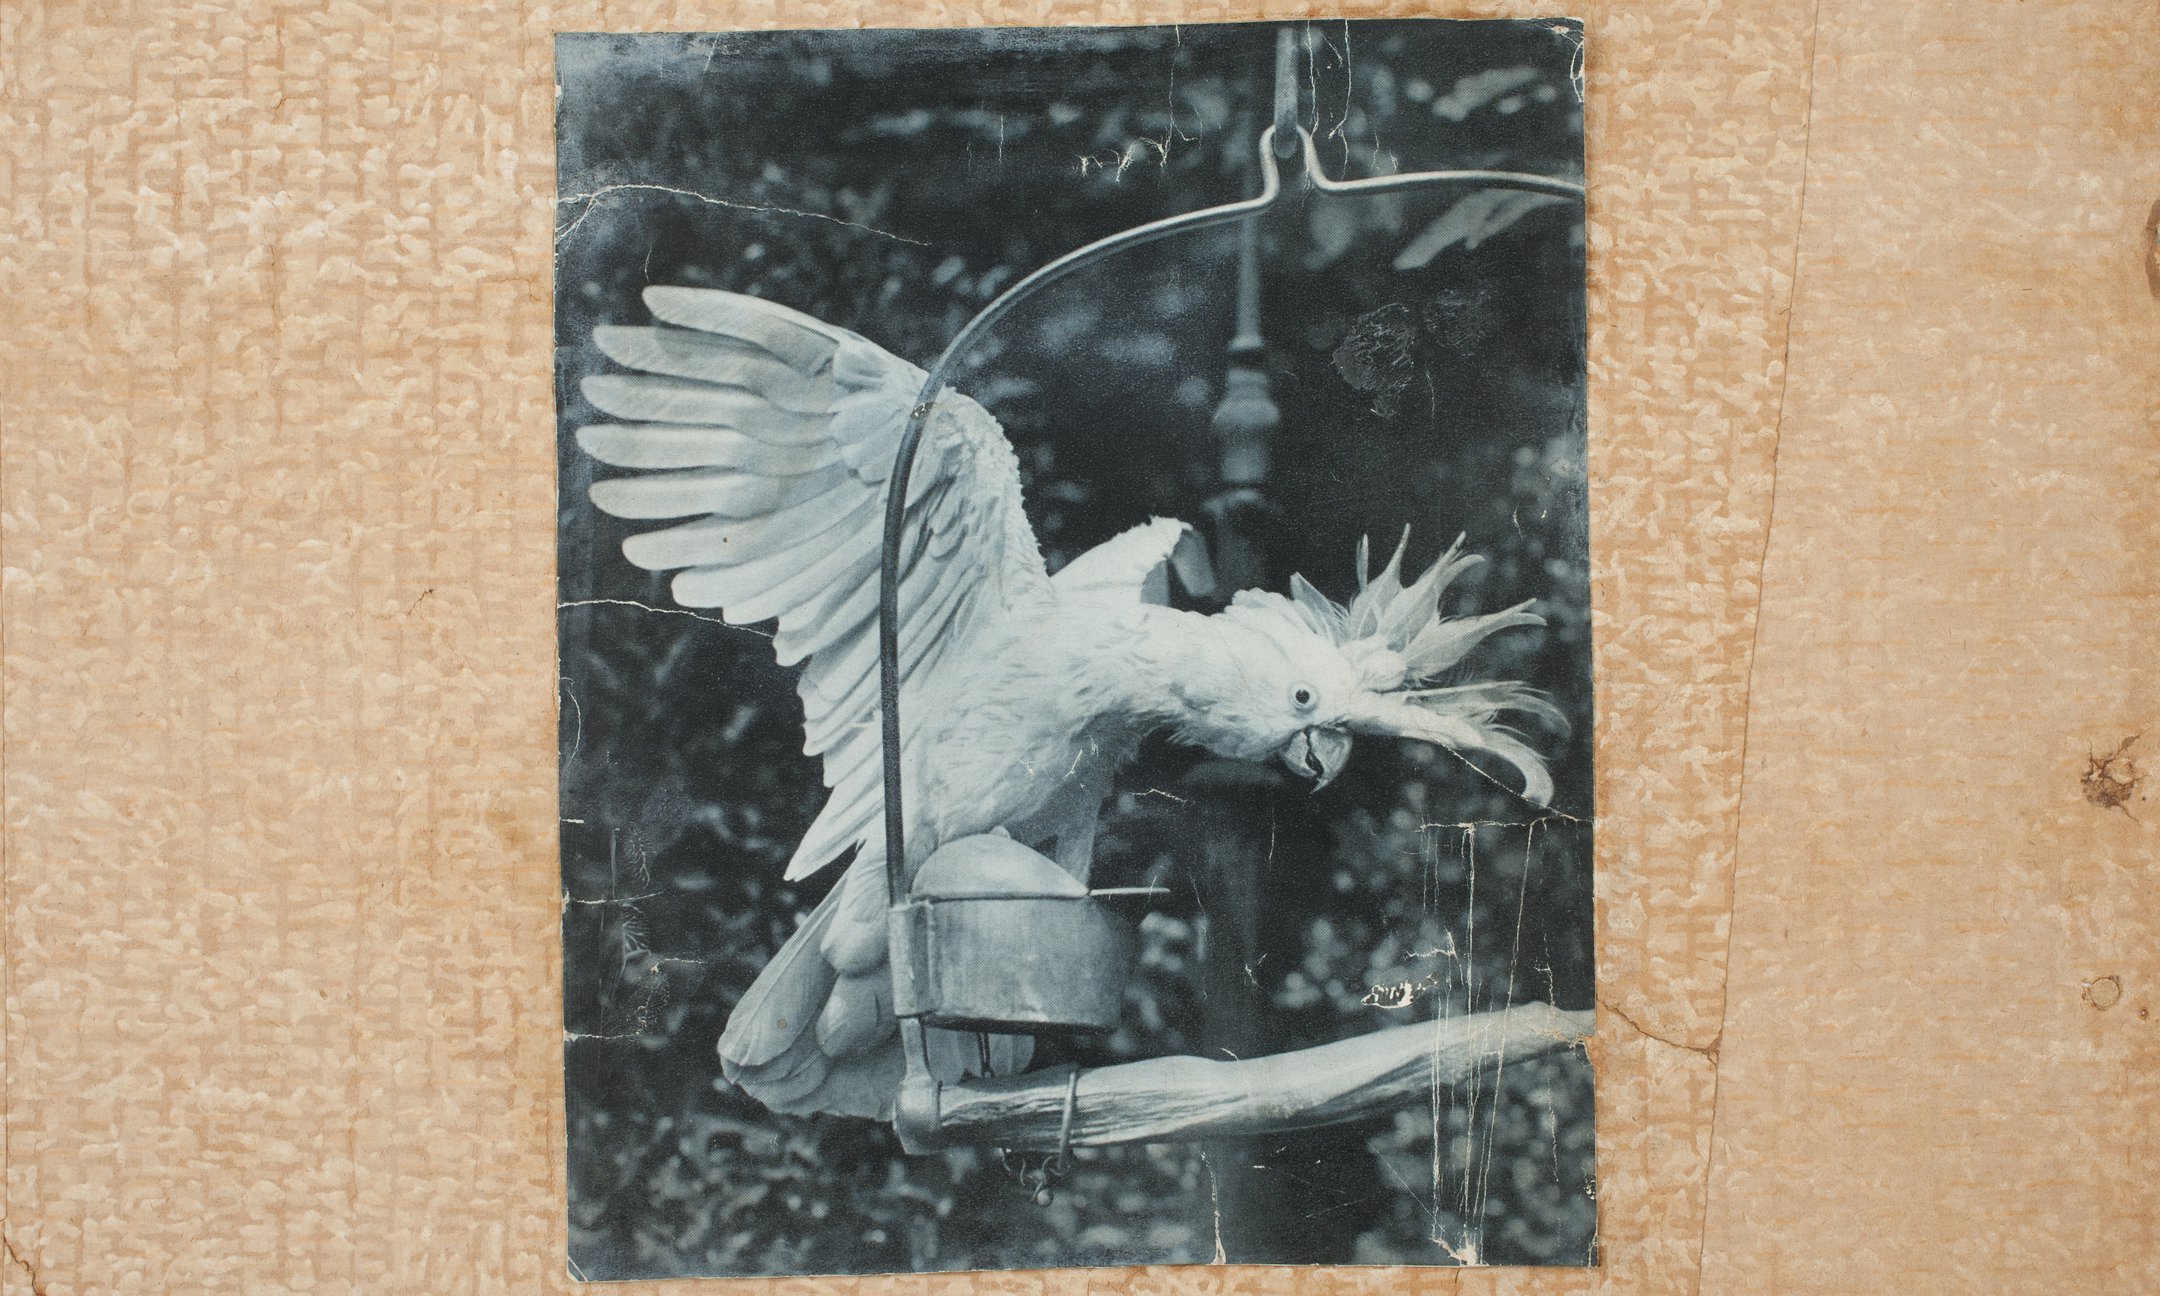 A Cockatoo, possibly in Artis, Amsterdam's zoo. Anne mentions Artis in one of her short stories. Source: unknown.